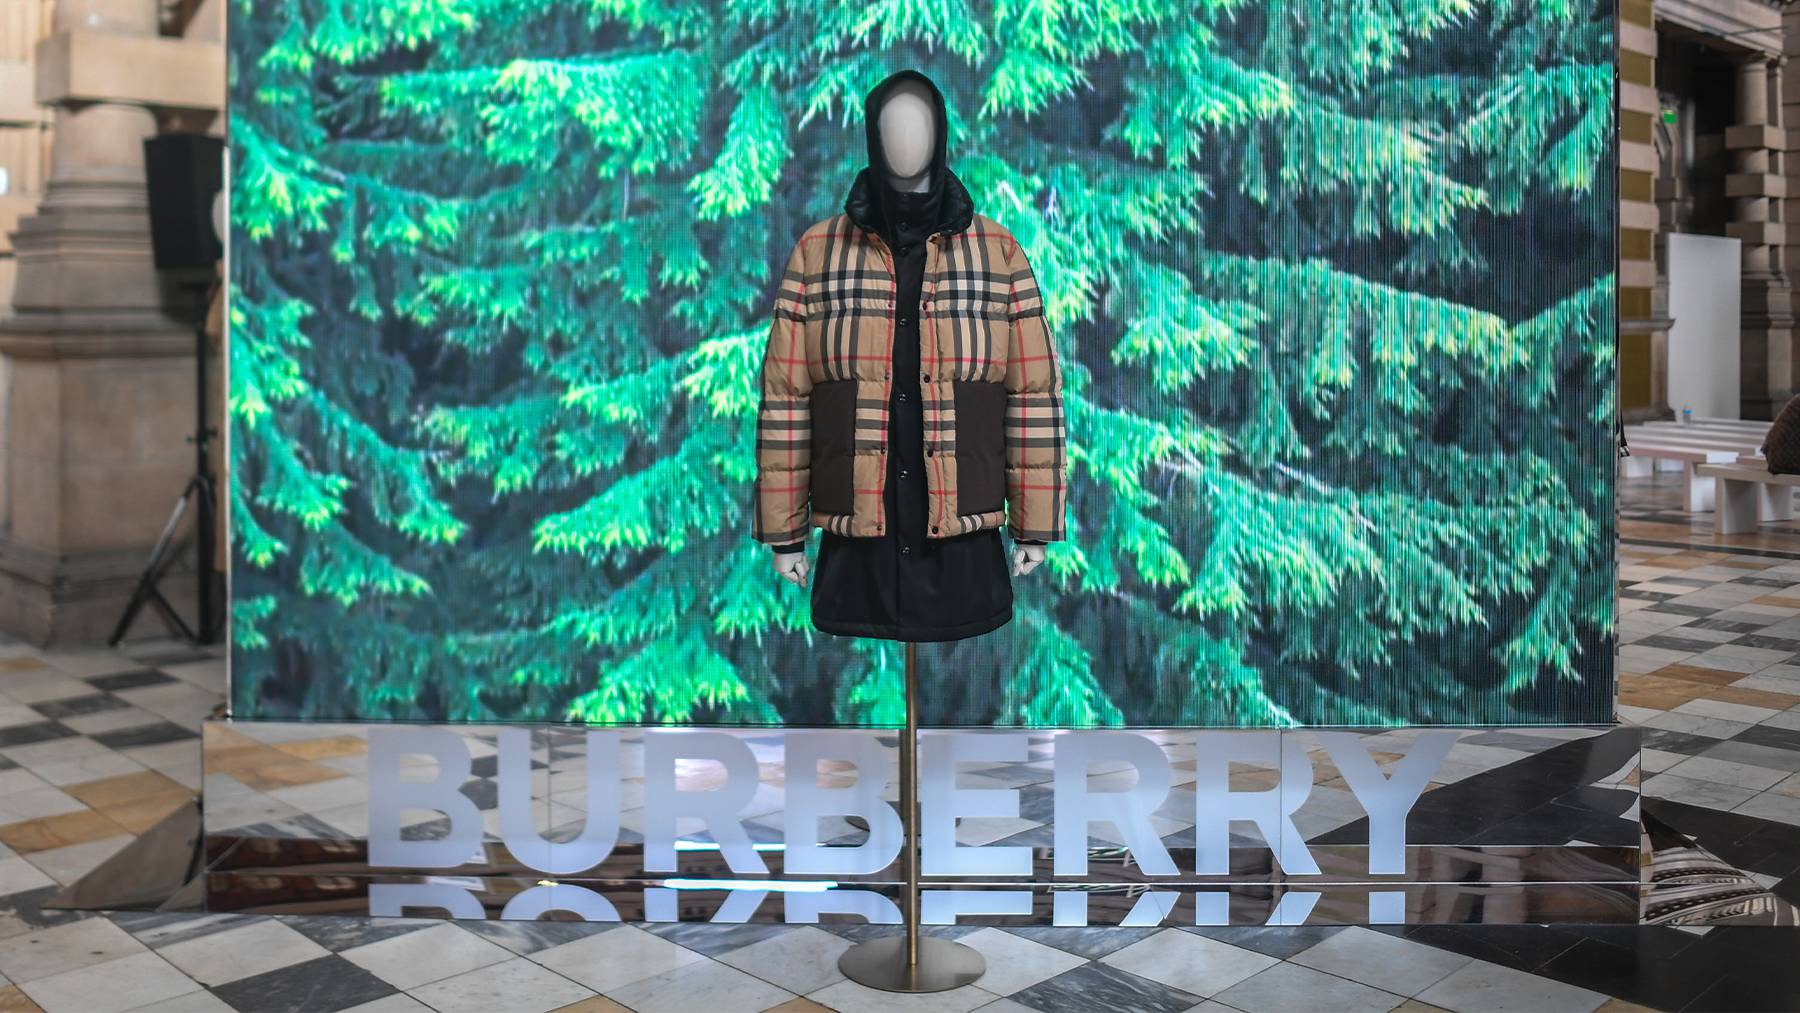 "Burberry’s new aesthetic is more in tune with the current streetwear zeitgeist. And yet it is not very original or deeply rooted in the brand’s heritage," said Luca Solca.